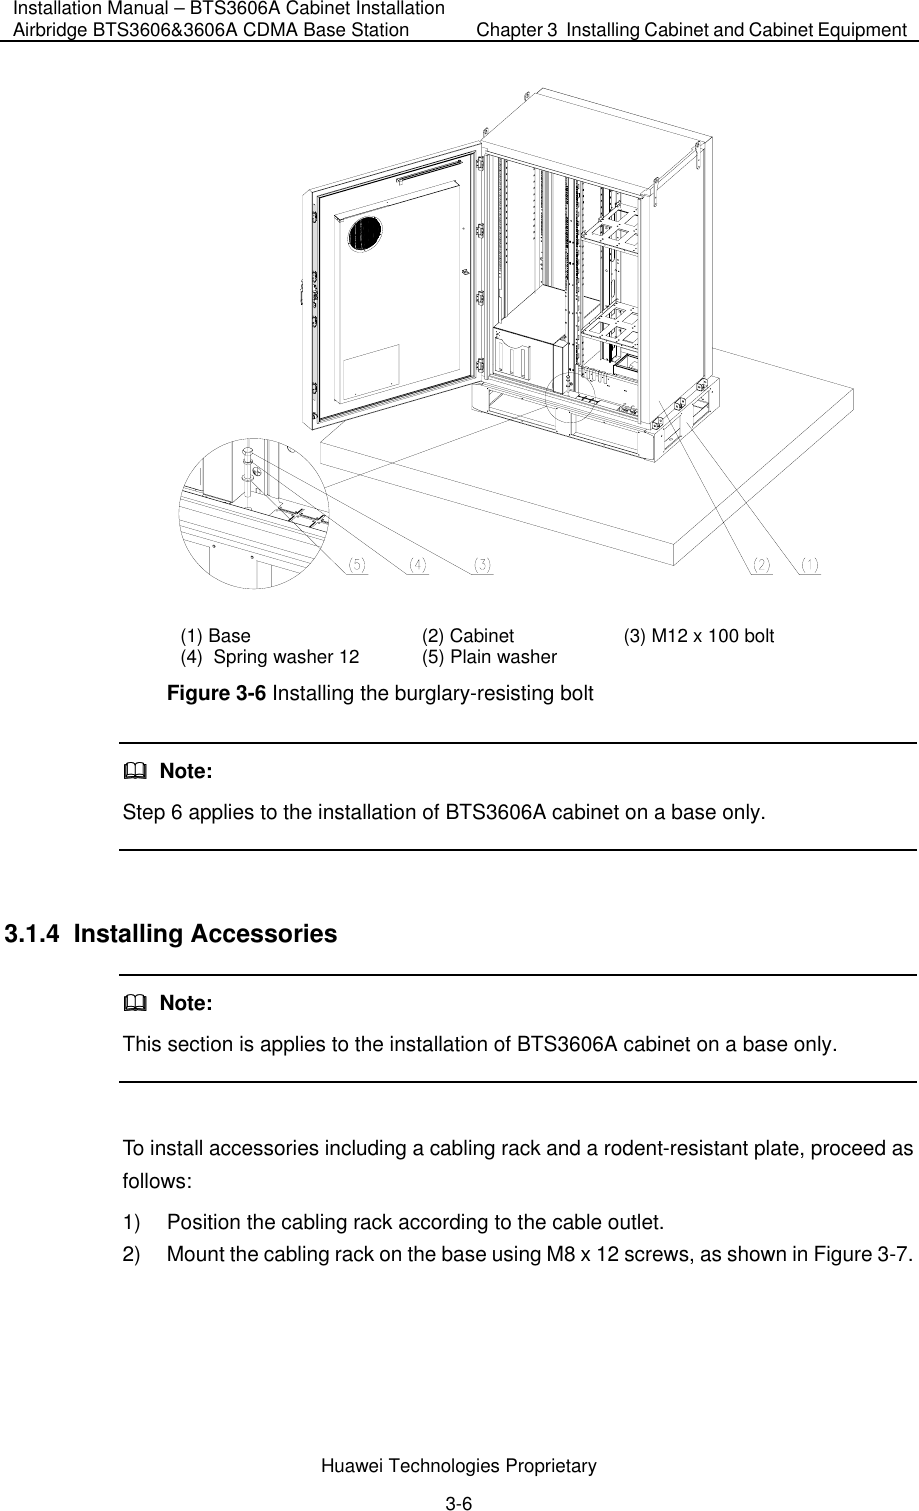 Installation Manual – BTS3606A Cabinet Installation Airbridge BTS3606&amp;3606A CDMA Base Station  Chapter 3  Installing Cabinet and Cabinet Equipment  Huawei Technologies Proprietary 3-6  (1) Base  (2) Cabinet  (3) M12 x 100 bolt  (4)  Spring washer 12   (5) Plain washer   Figure 3-6 Installing the burglary-resisting bolt   Note: Step 6 applies to the installation of BTS3606A cabinet on a base only.  3.1.4  Installing Accessories   Note: This section is applies to the installation of BTS3606A cabinet on a base only.  To install accessories including a cabling rack and a rodent-resistant plate, proceed as follows: 1)  Position the cabling rack according to the cable outlet. 2)  Mount the cabling rack on the base using M8 x 12 screws, as shown in Figure 3-7. 